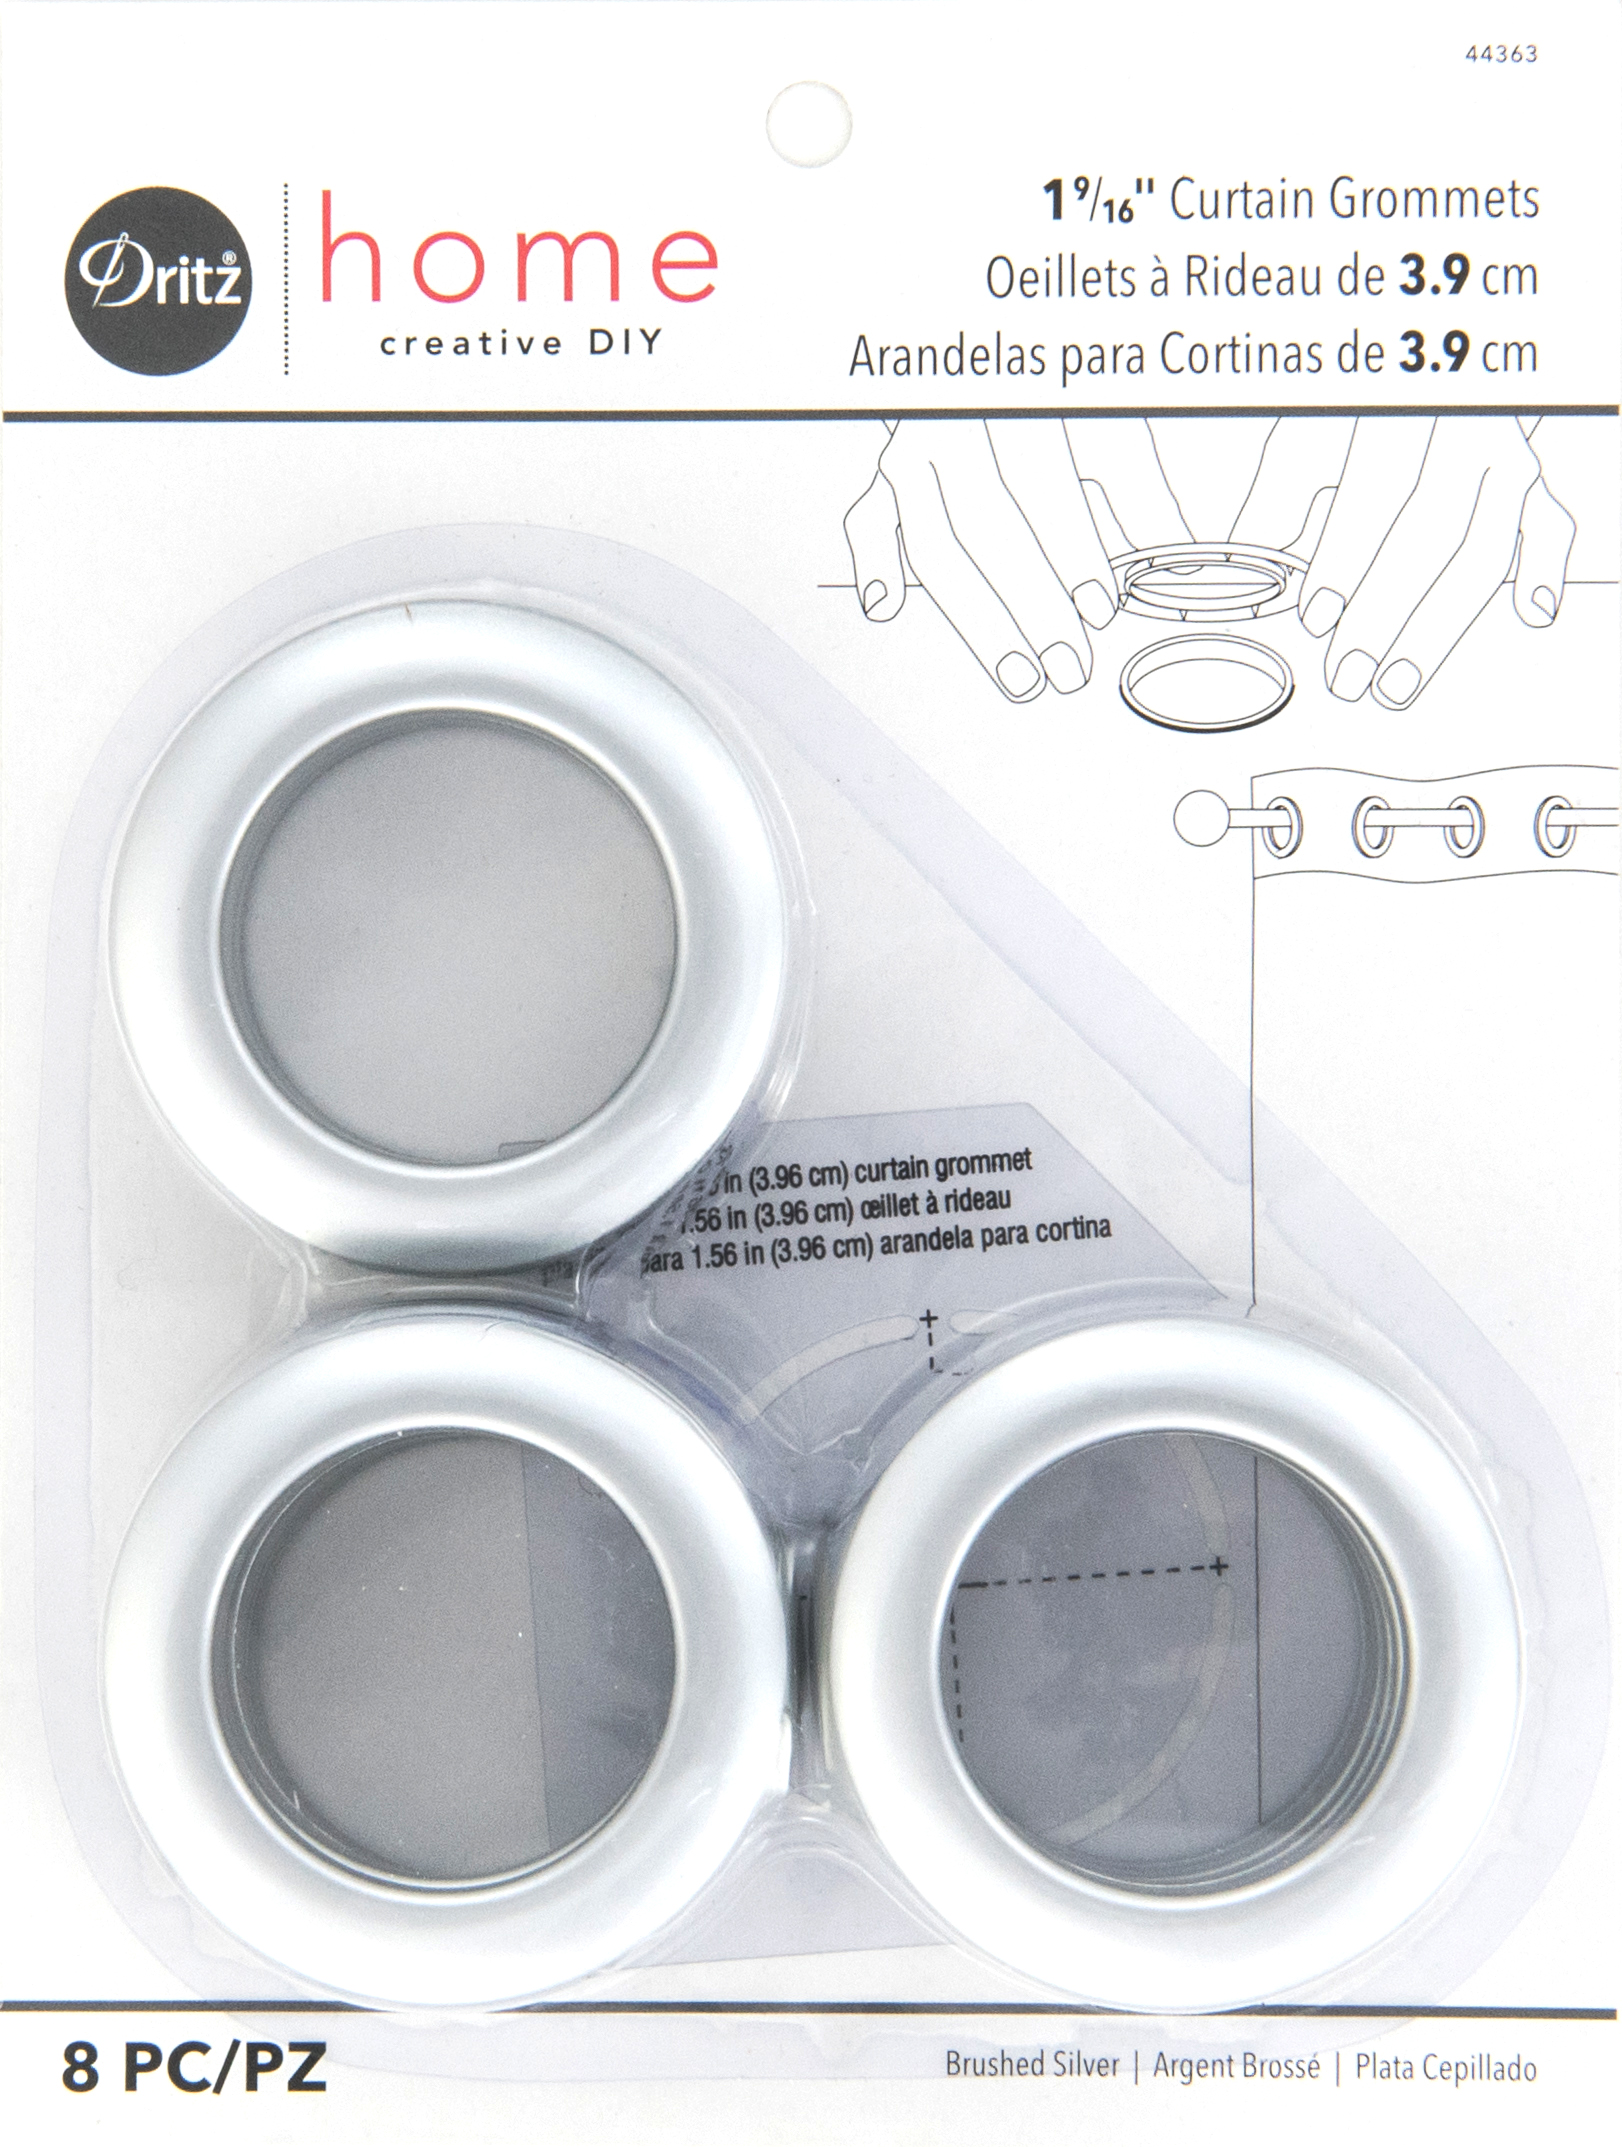 Dritz 1-9/16" Curtain Grommets, Brushed Silver, 8 Sets - image 1 of 3